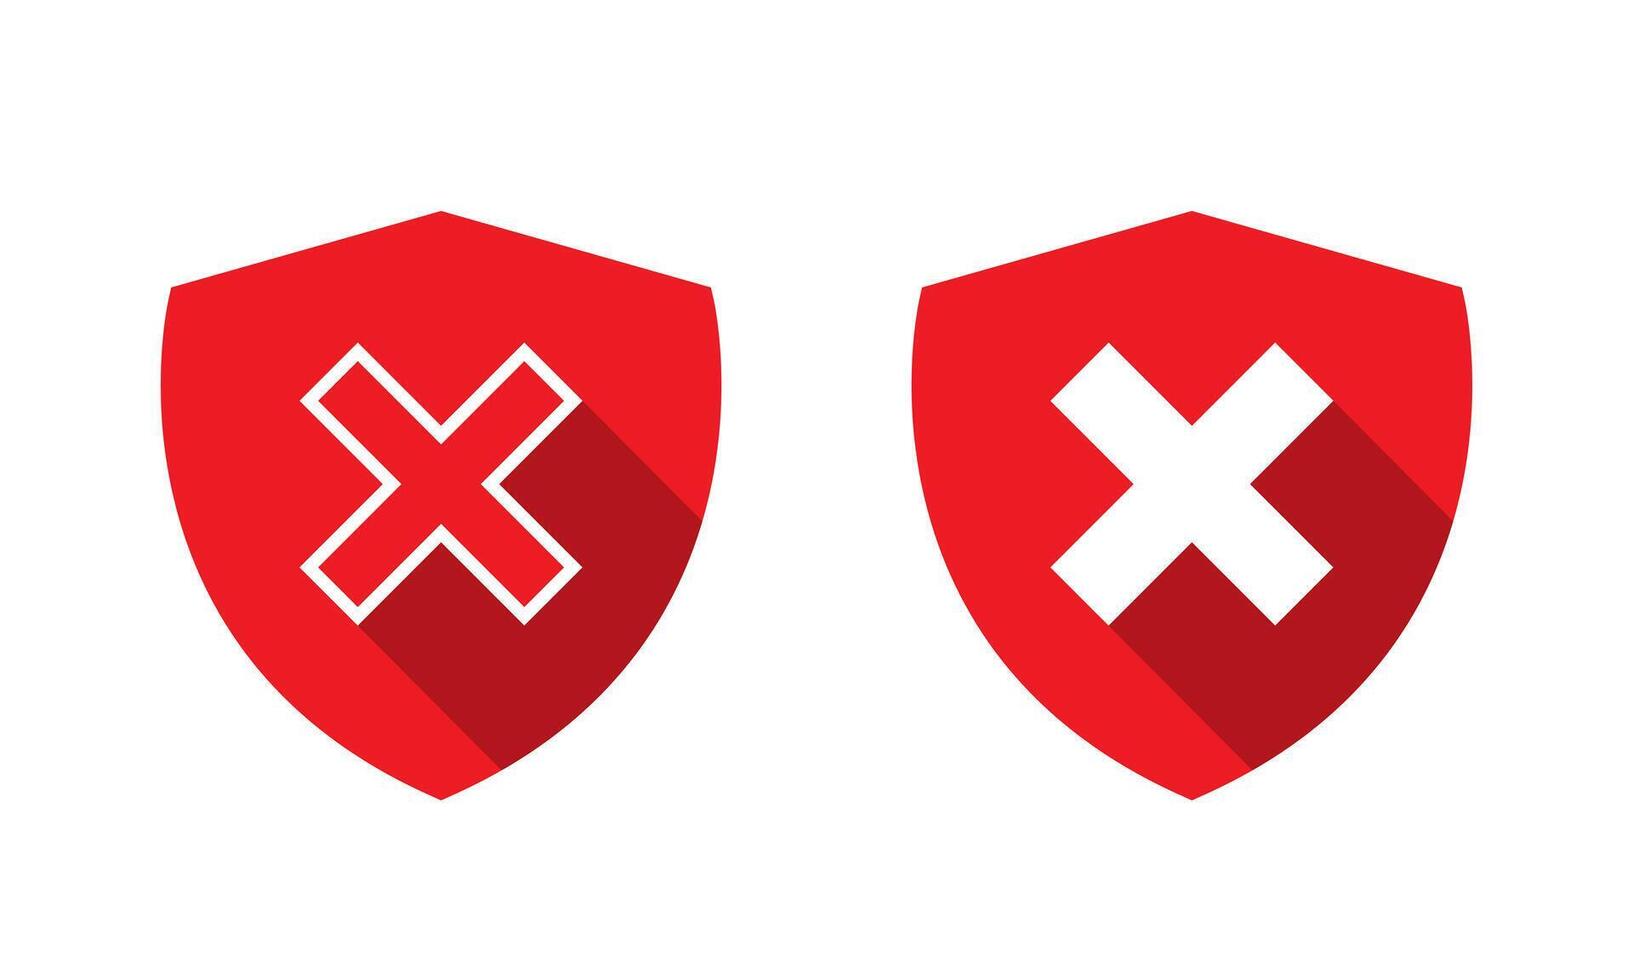 Red shield with x cross mark icon vector with long shadow